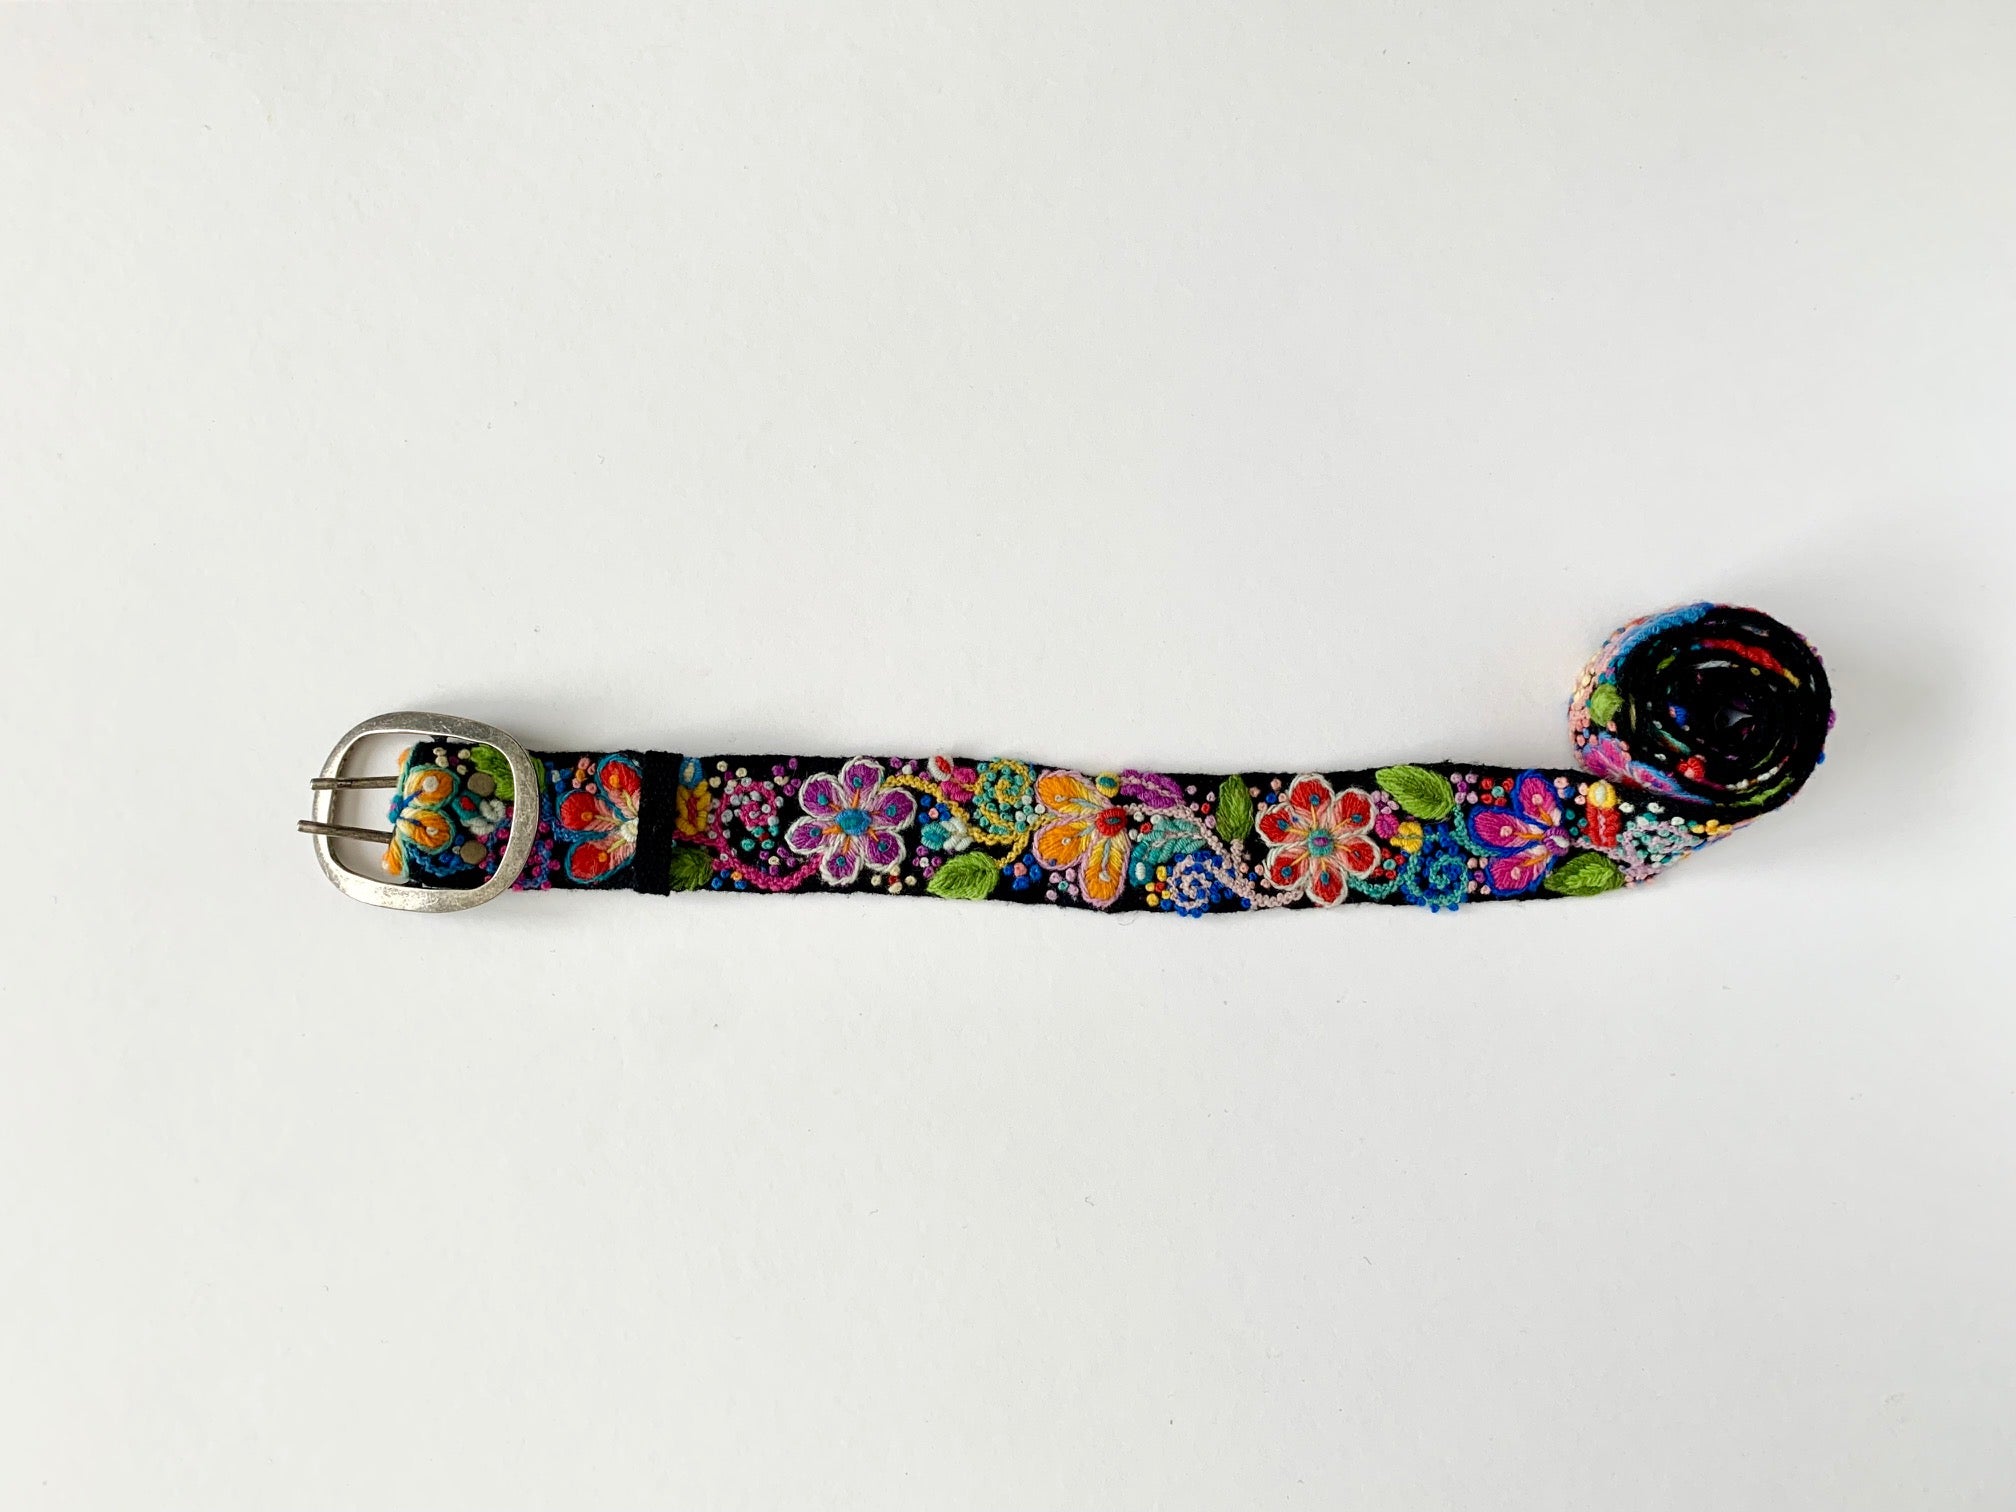 Black Floral Belt with colorful embroidered florals and butterfly on hand loomed wool fabric. Sizes: Small, Medium, Large, Extra Large.